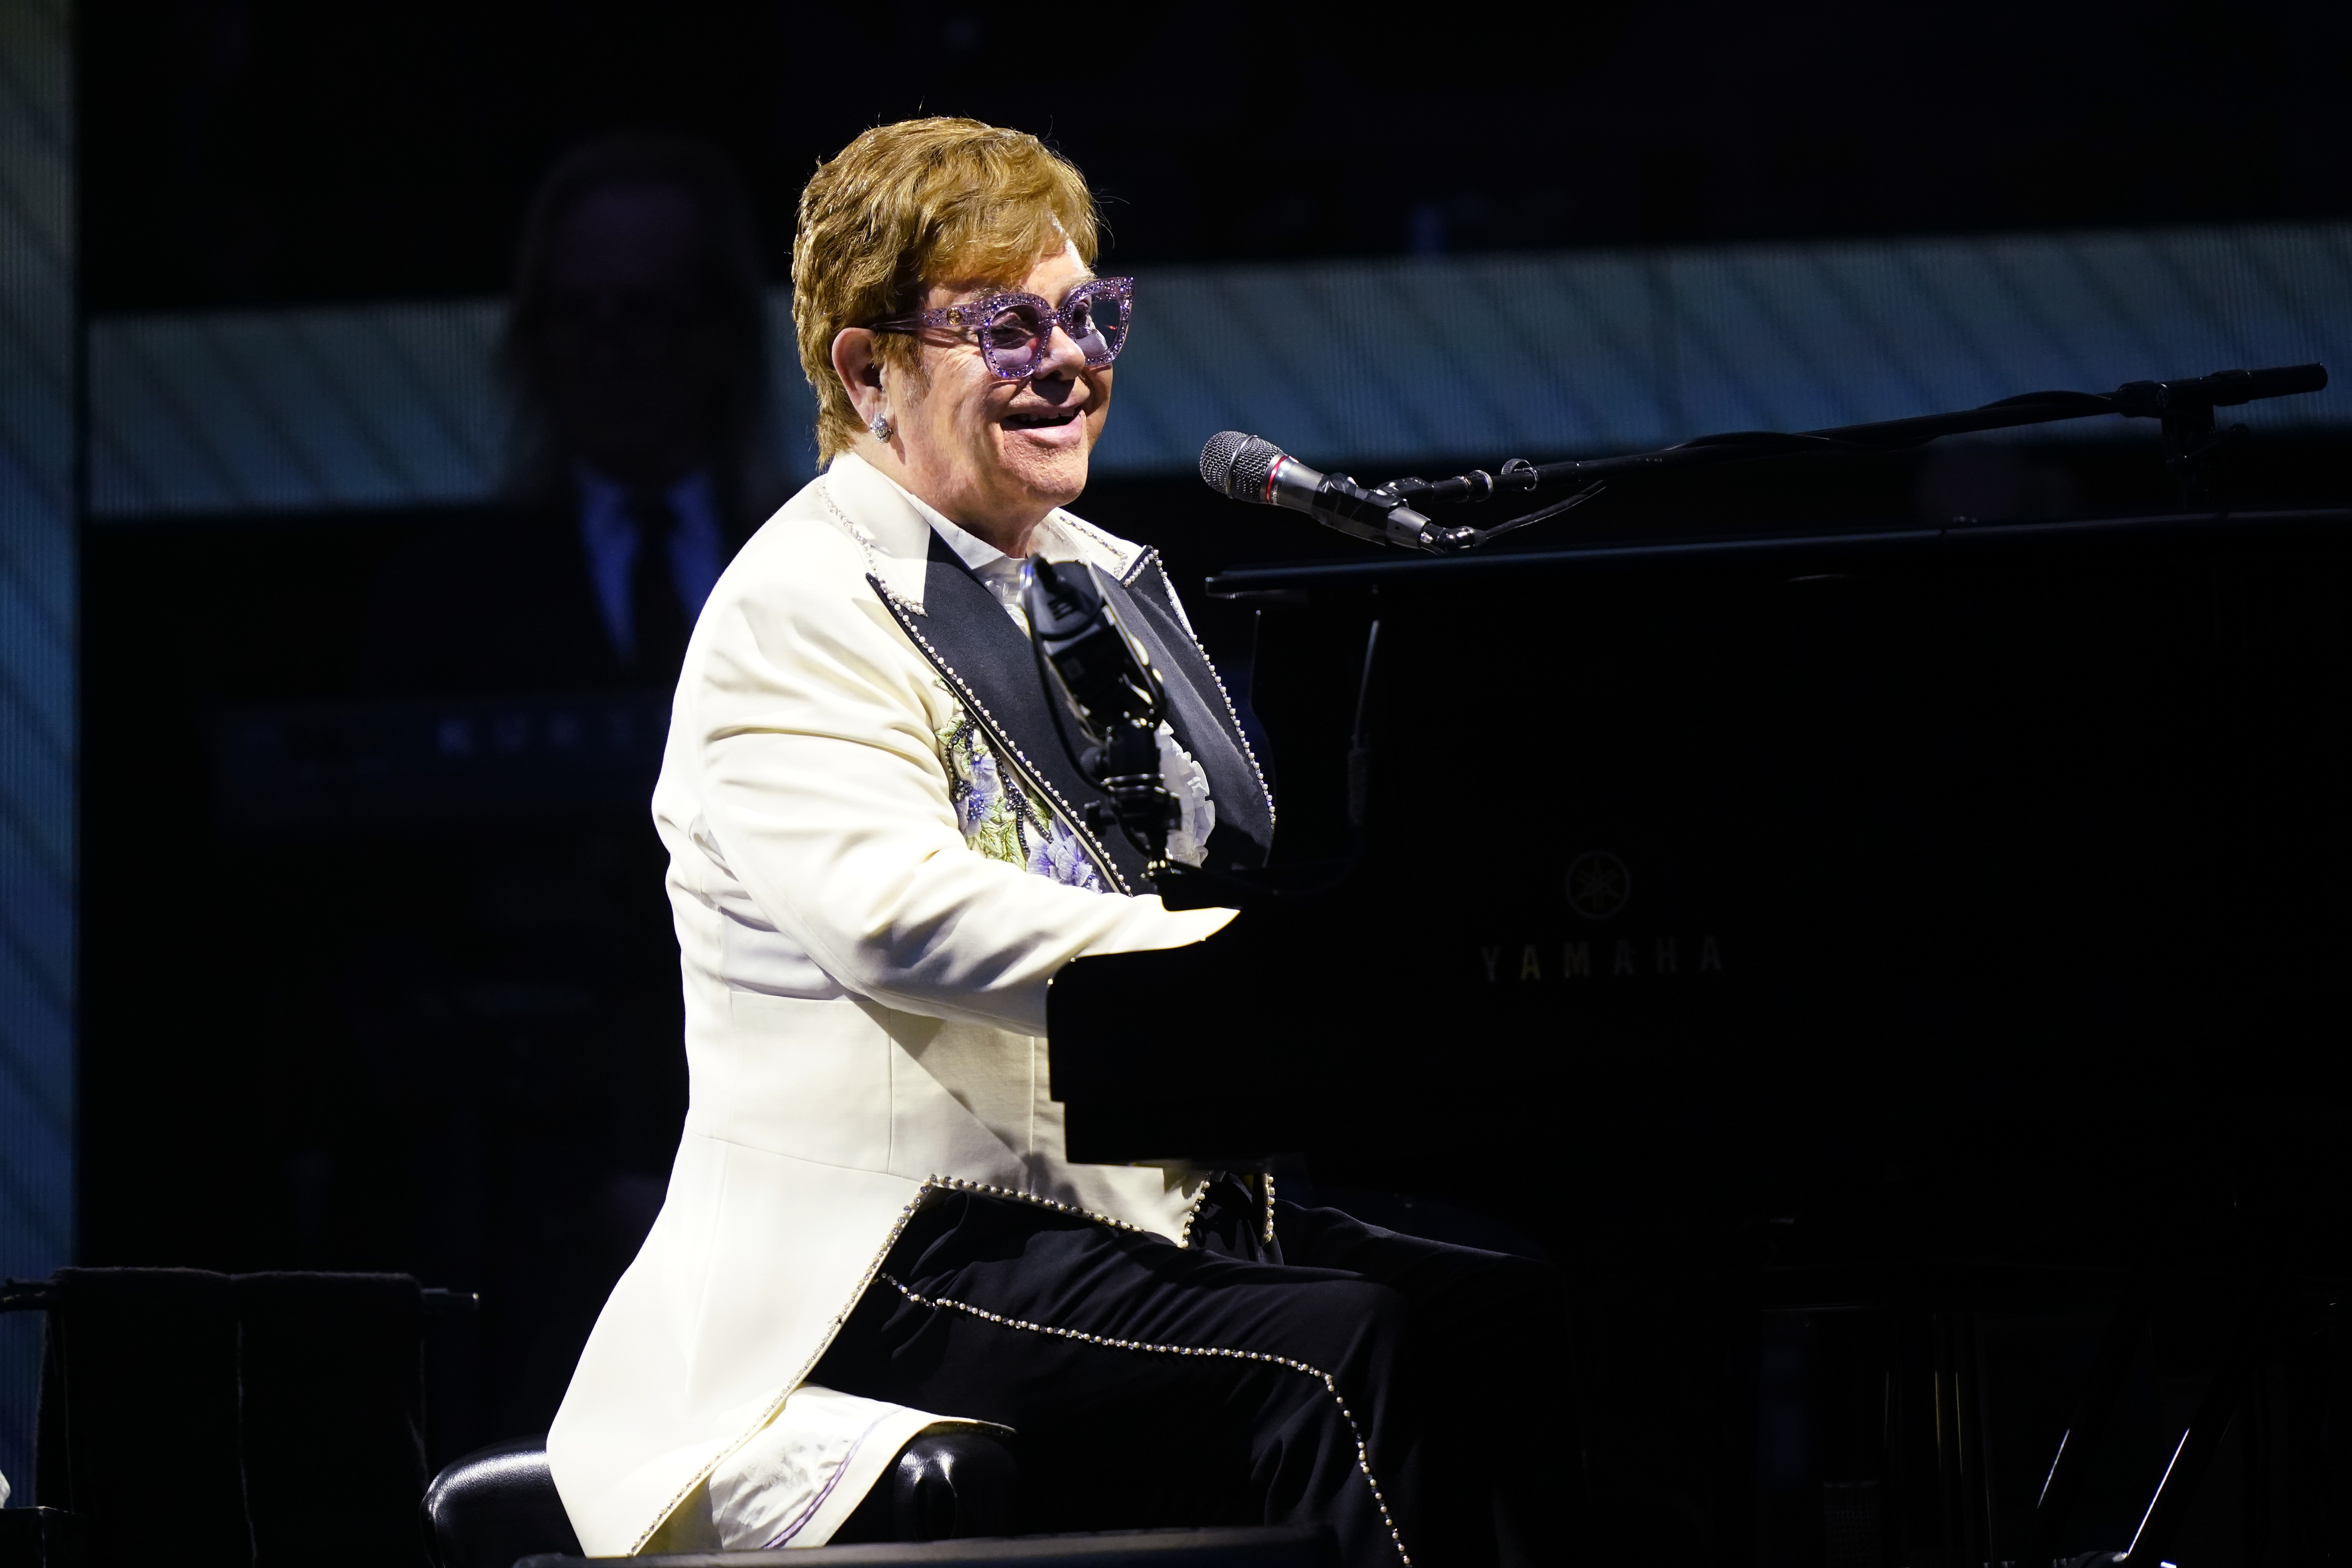 From the end of the world to your town, Elton John's goodbye –